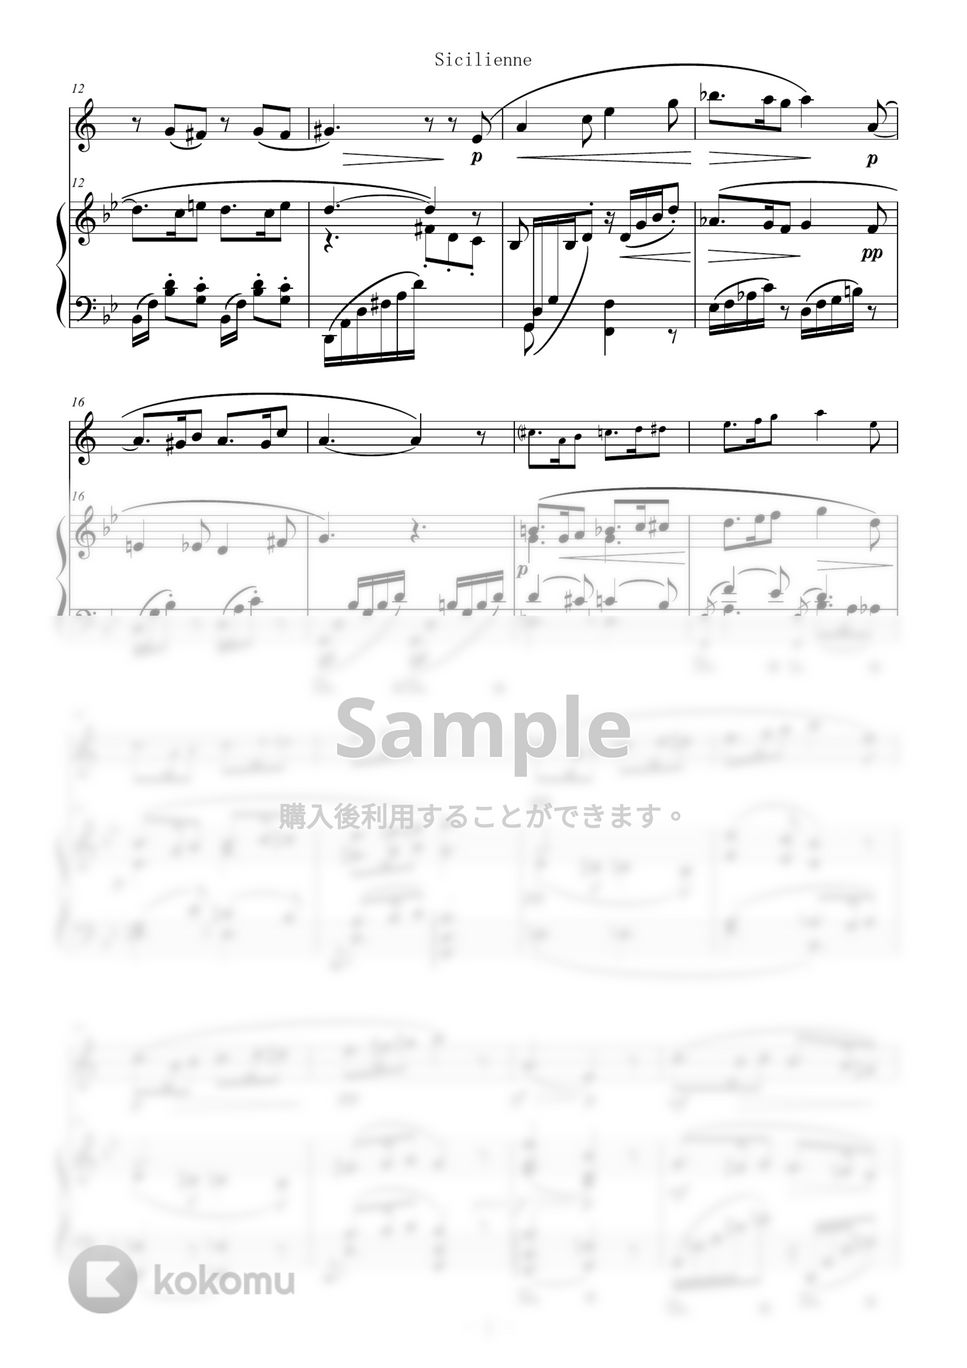 Gabriel Urbain Fauré - シシリエンヌ ( シチリアーノ ) for Trumpet in Bb and Piano (トランペット/ピアノ/フォーレ/) by Zoe